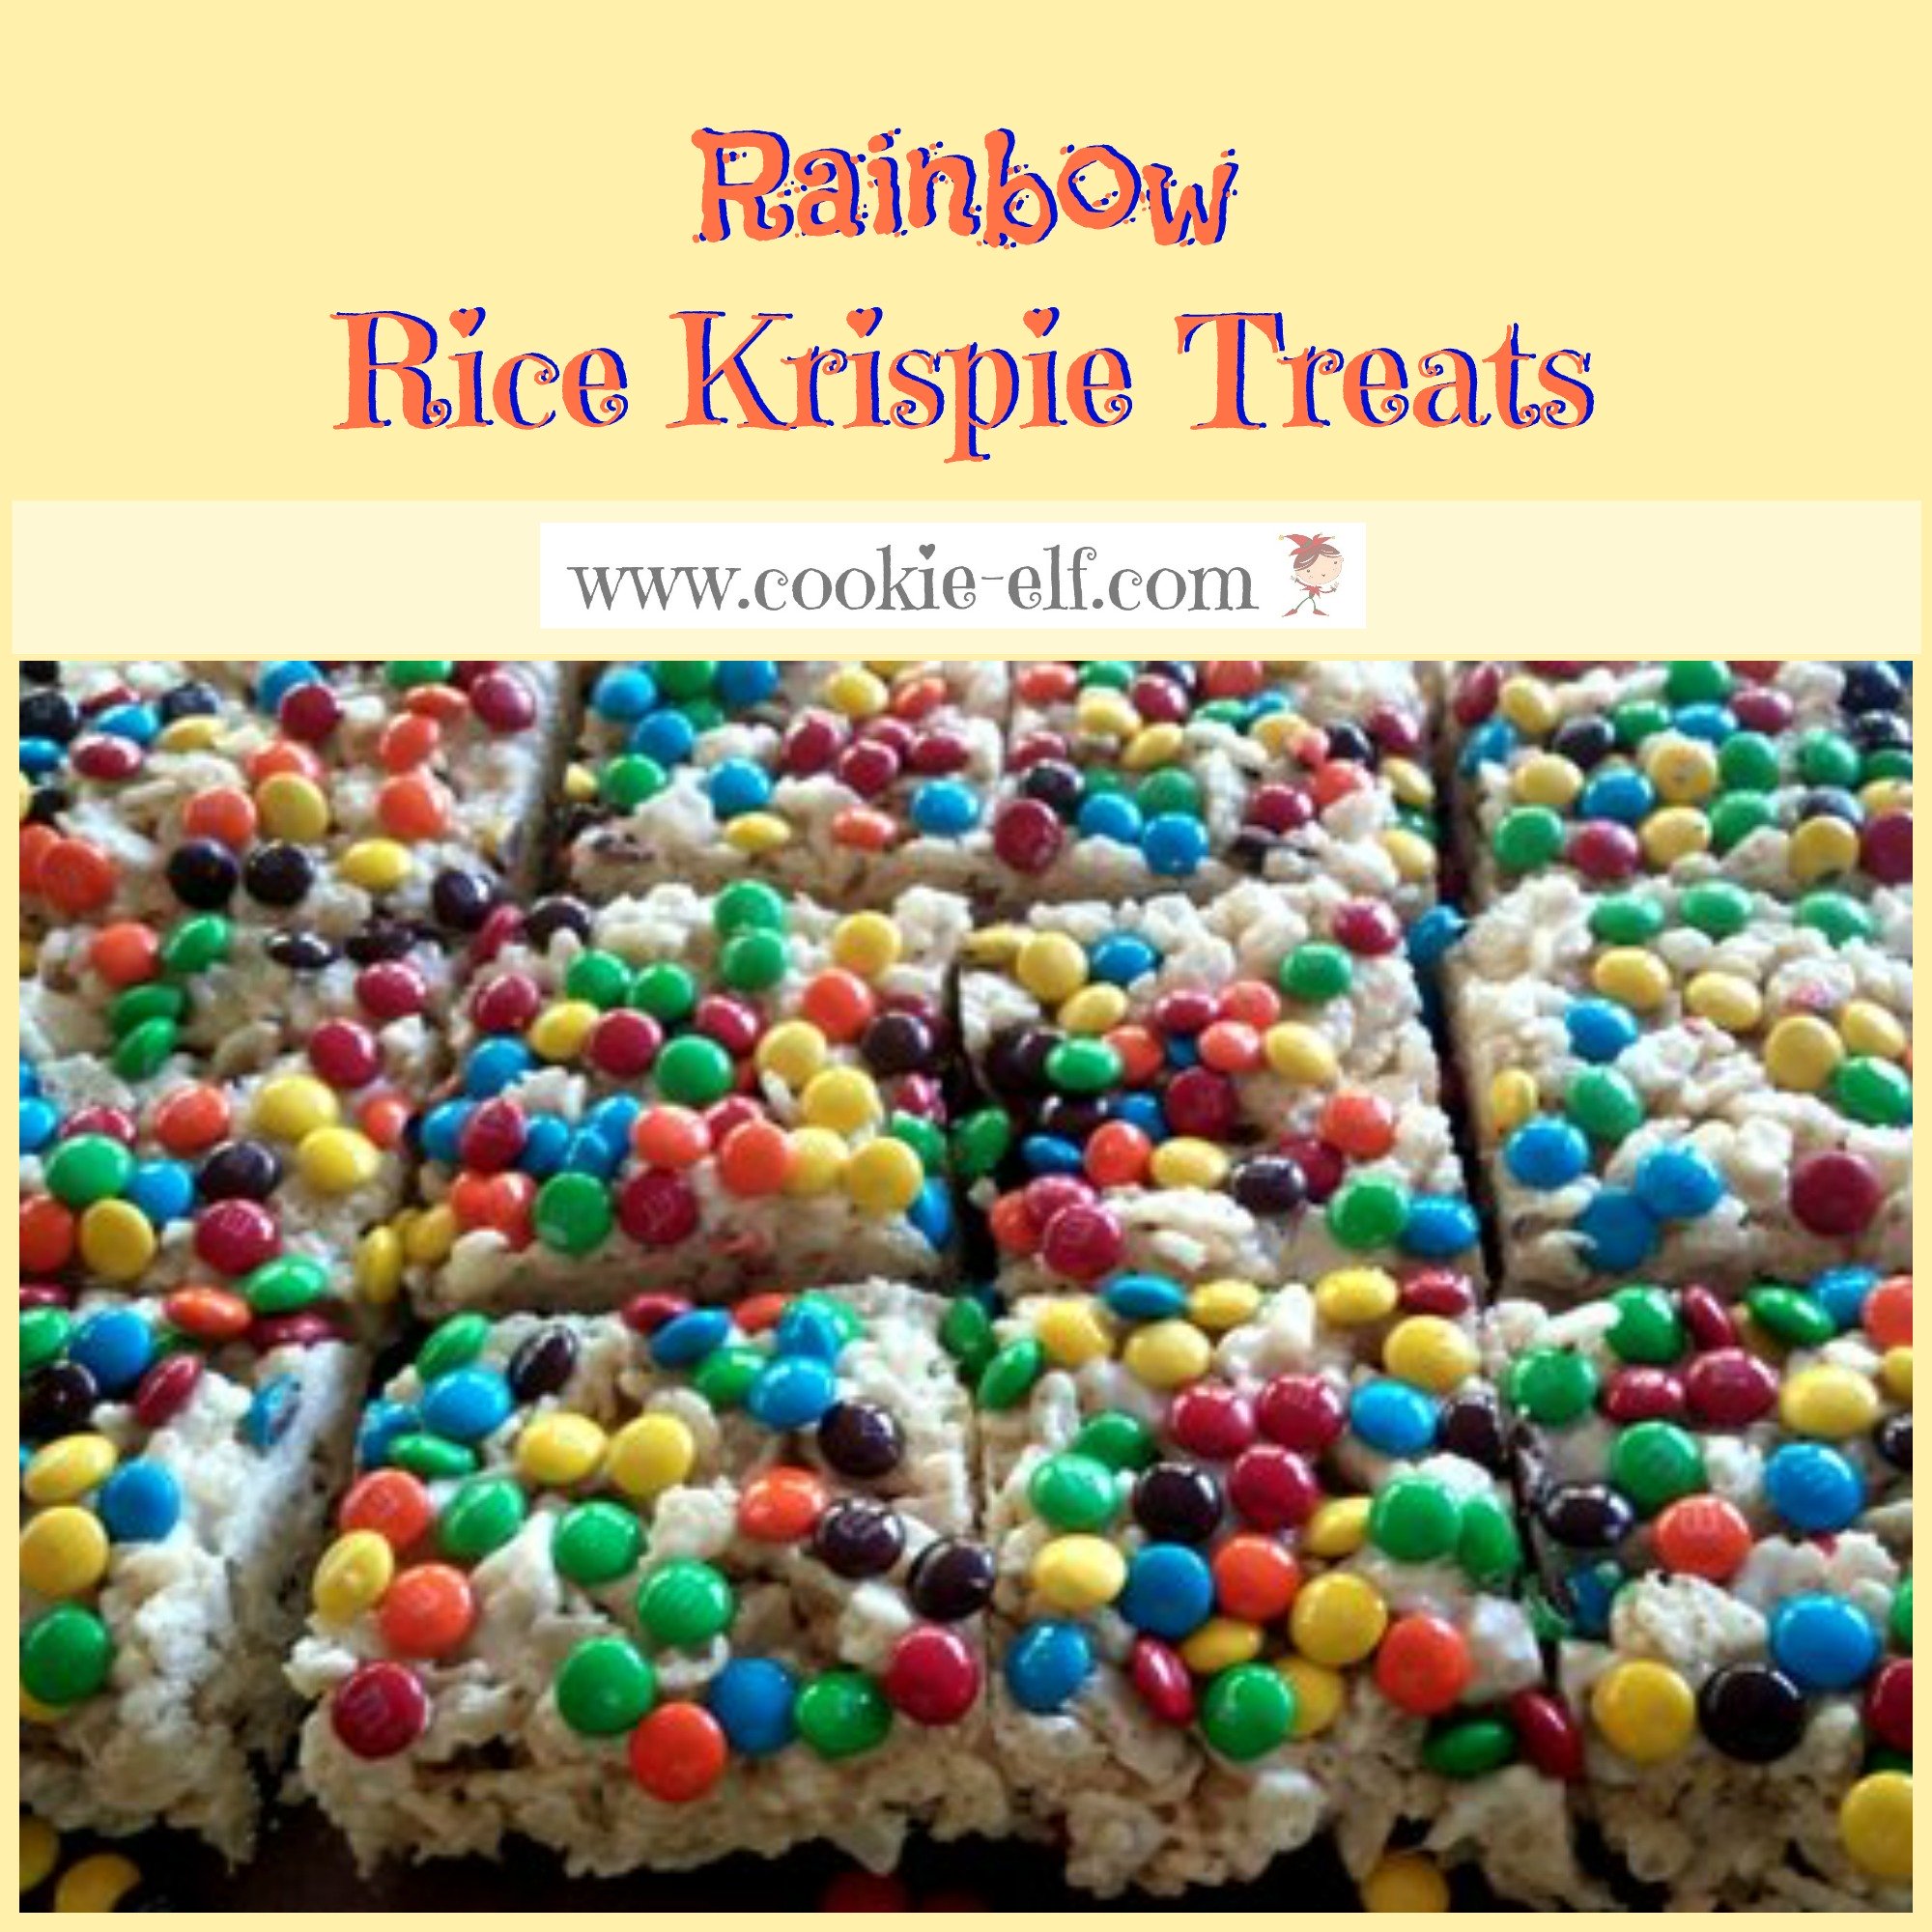 Rainbow Rice Krispie Treats: a RKT variation and super-easy no-bake cookie recipe with The Cookie Elf